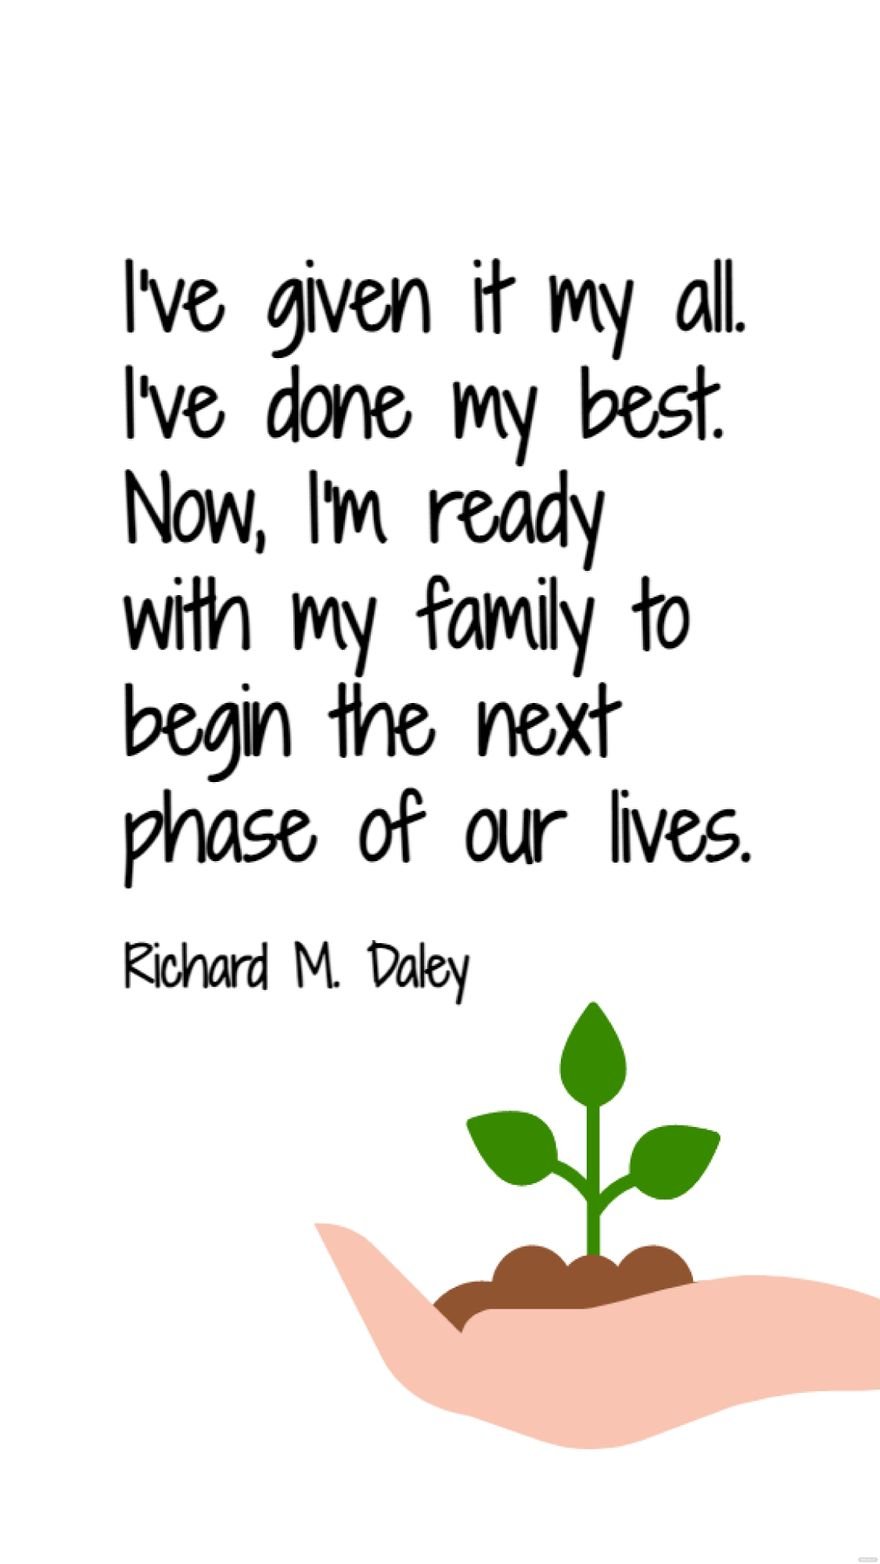 Richard M. Daley - I've given it my all. I've done my best. Now, I'm ready with my family to begin the next phase of our lives.